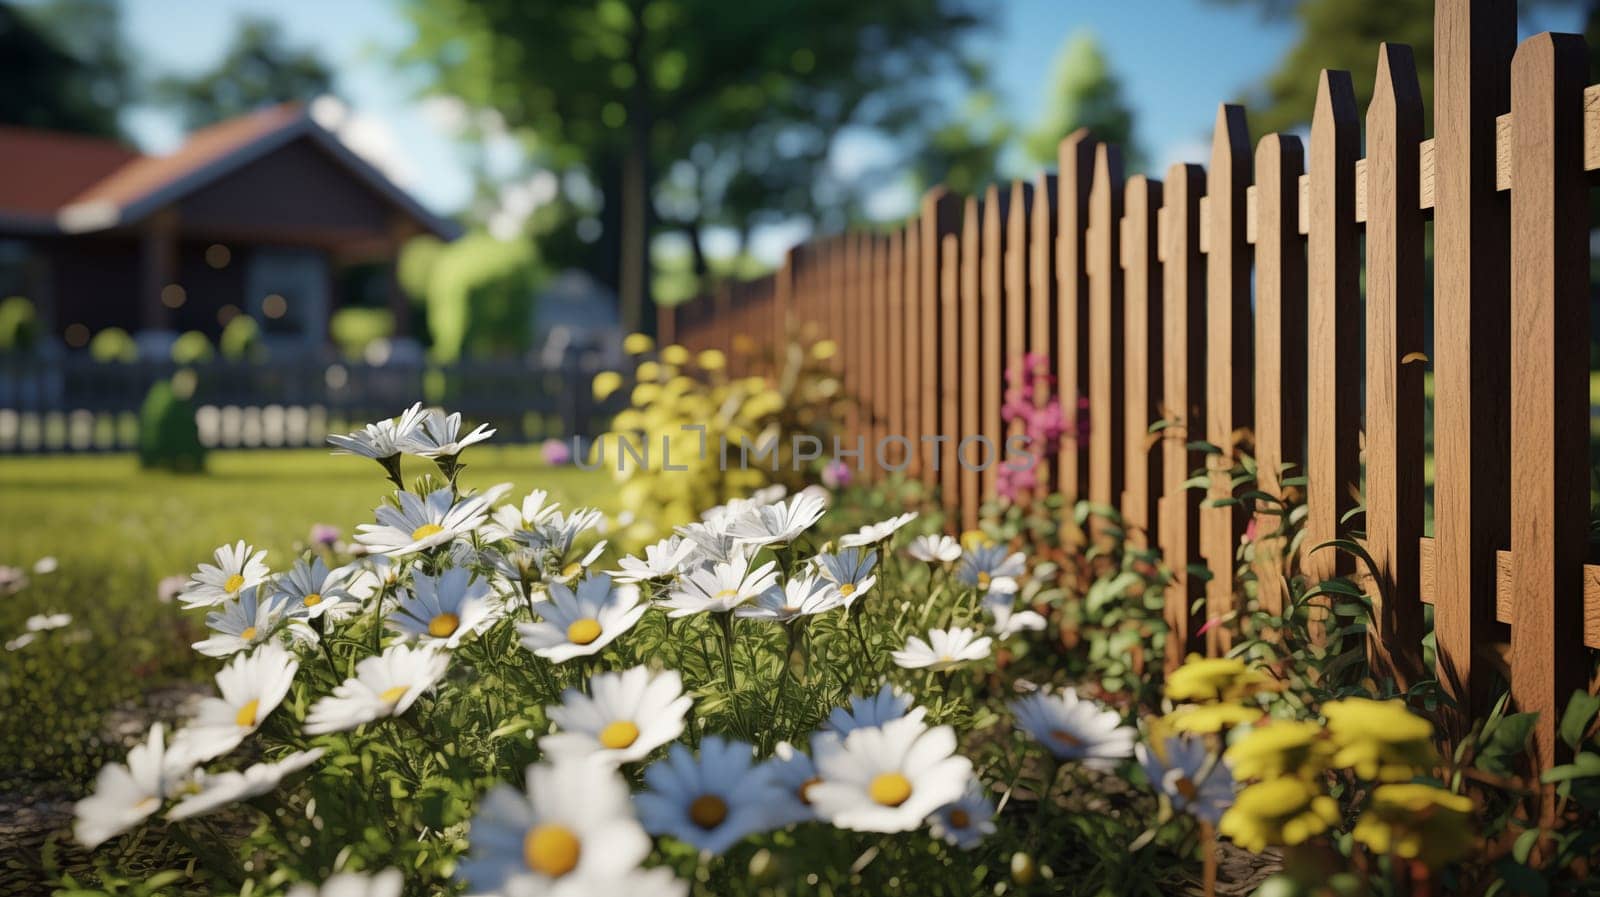 White flowers blooming along a wooden picket fence in a suburban setting with a house in the background.